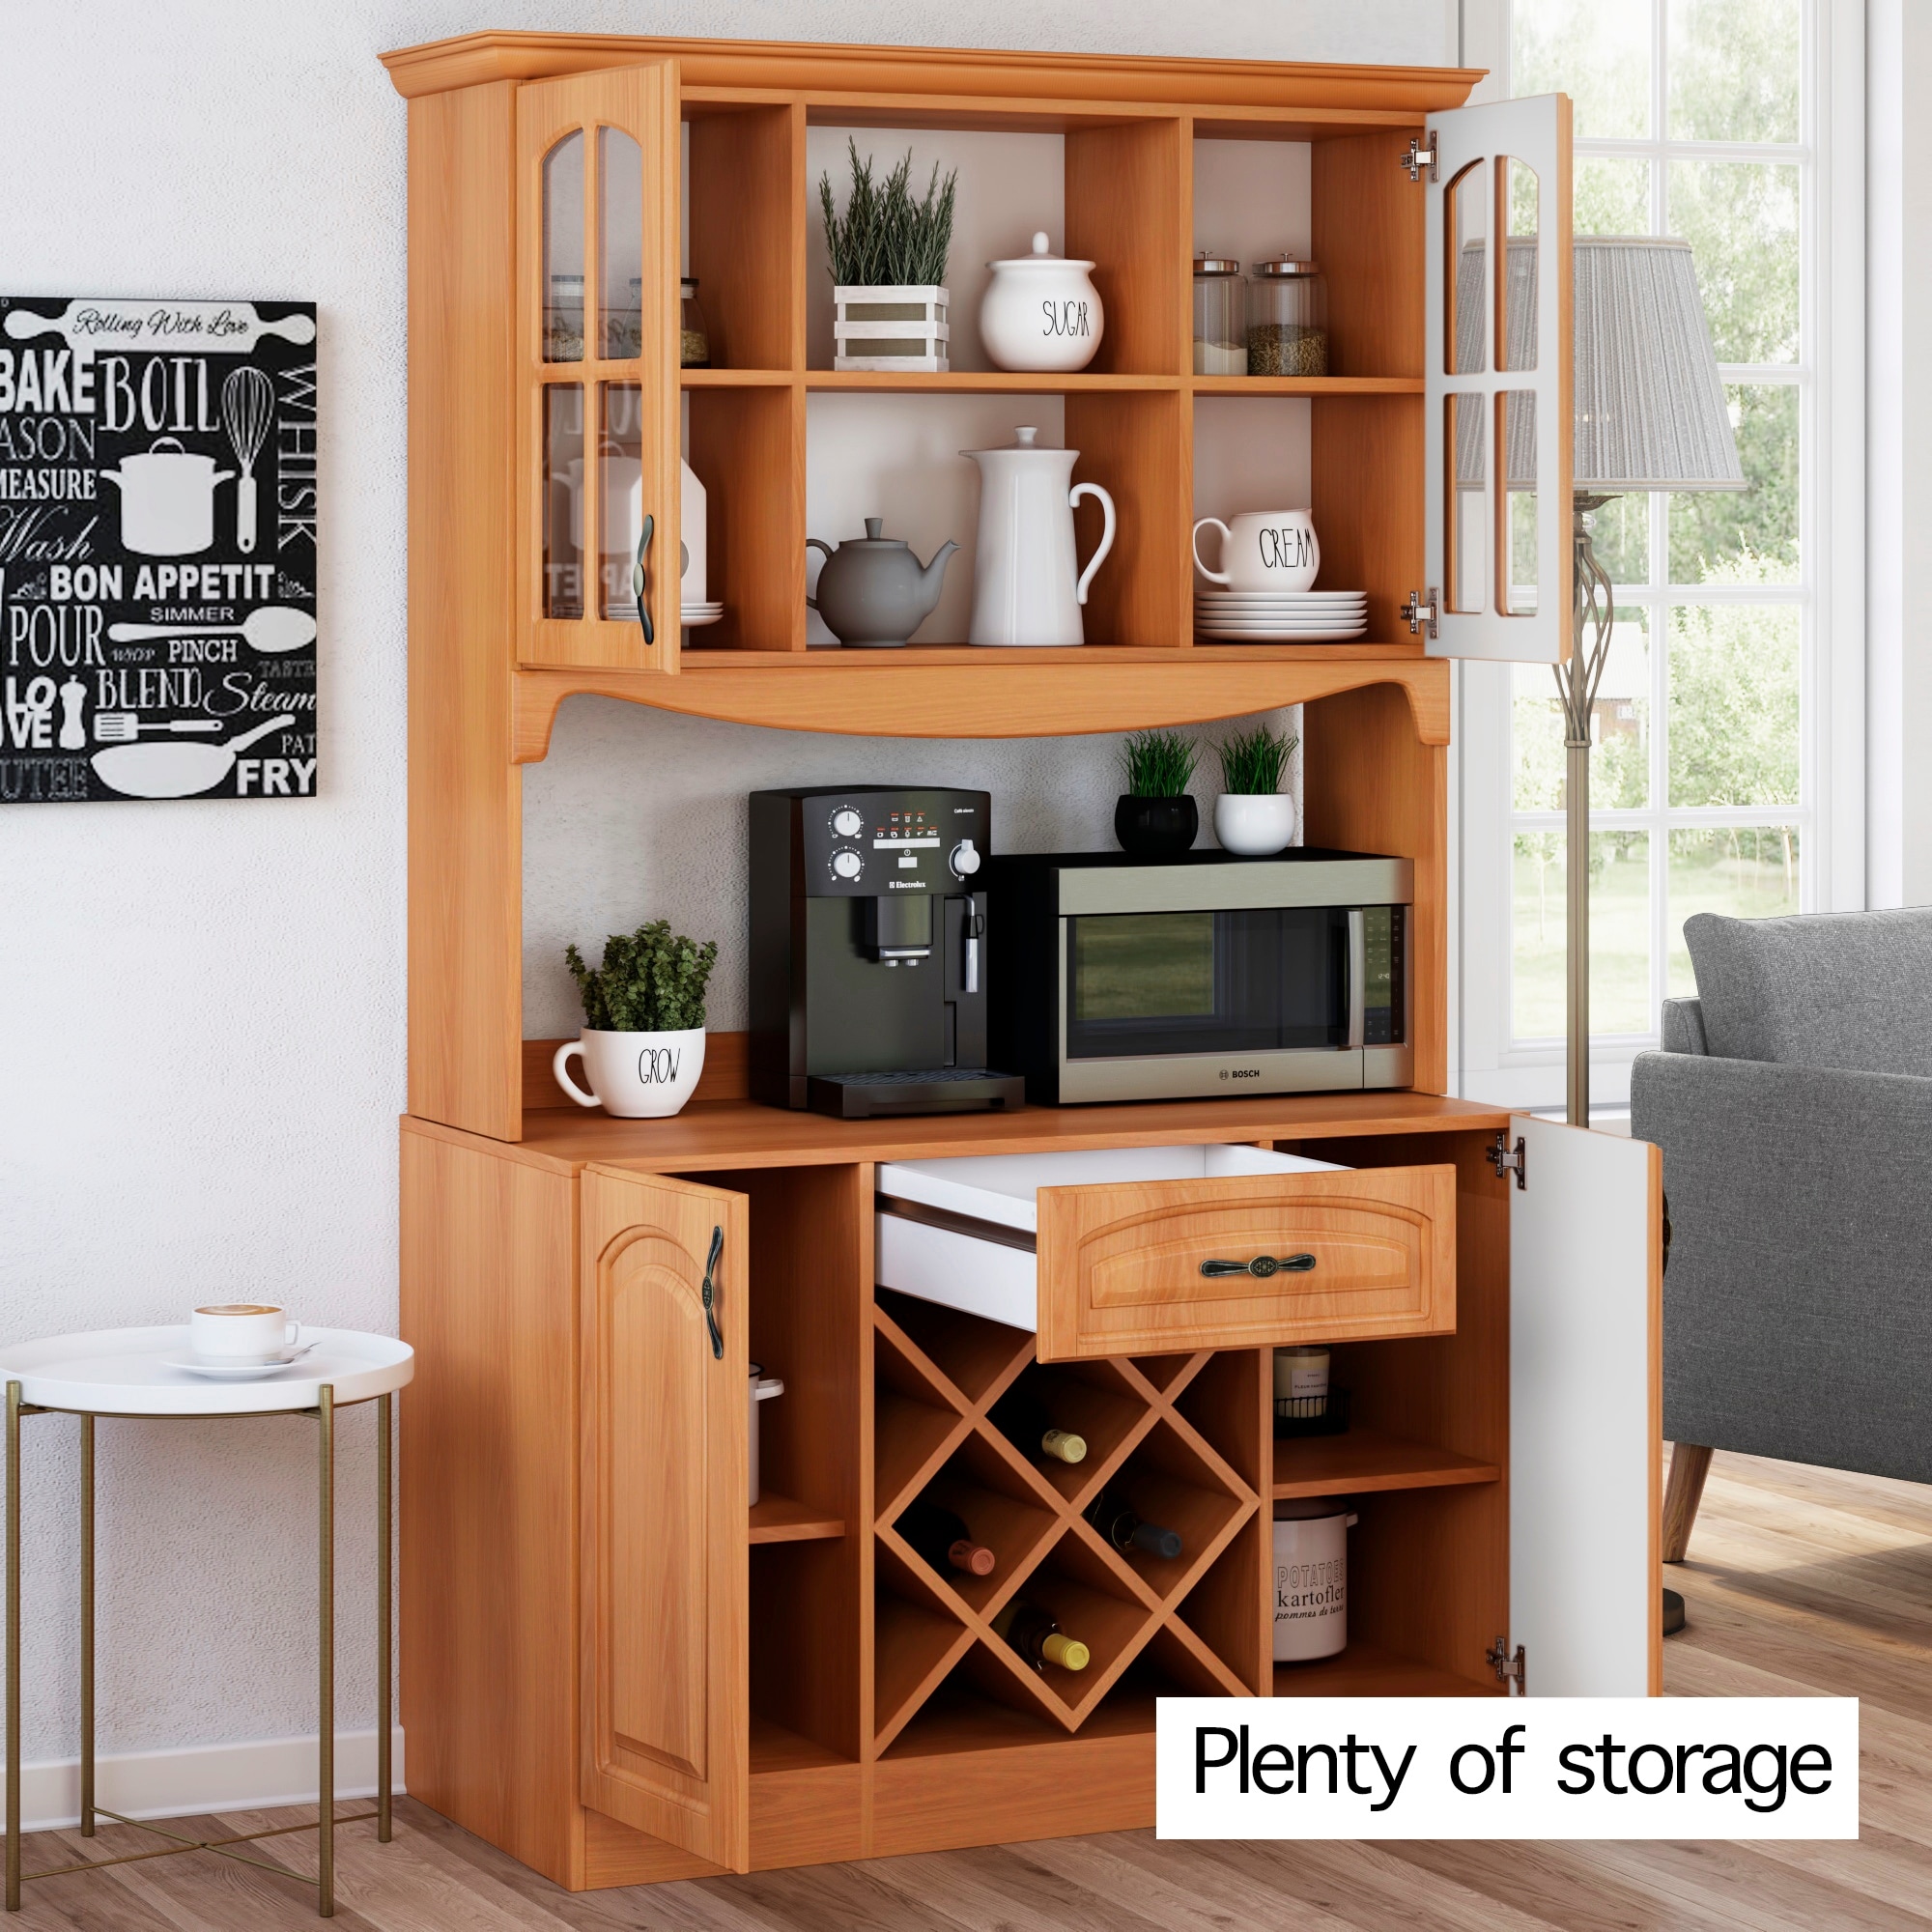 https://ak1.ostkcdn.com/images/products/is/images/direct/d47ef375b55fb028c309a3dab62b992a94dc261e/Living-Skog-Pantry-Kitchen-Storage-Cabinet-Wine-Buffet-MDF-Cherry.jpg